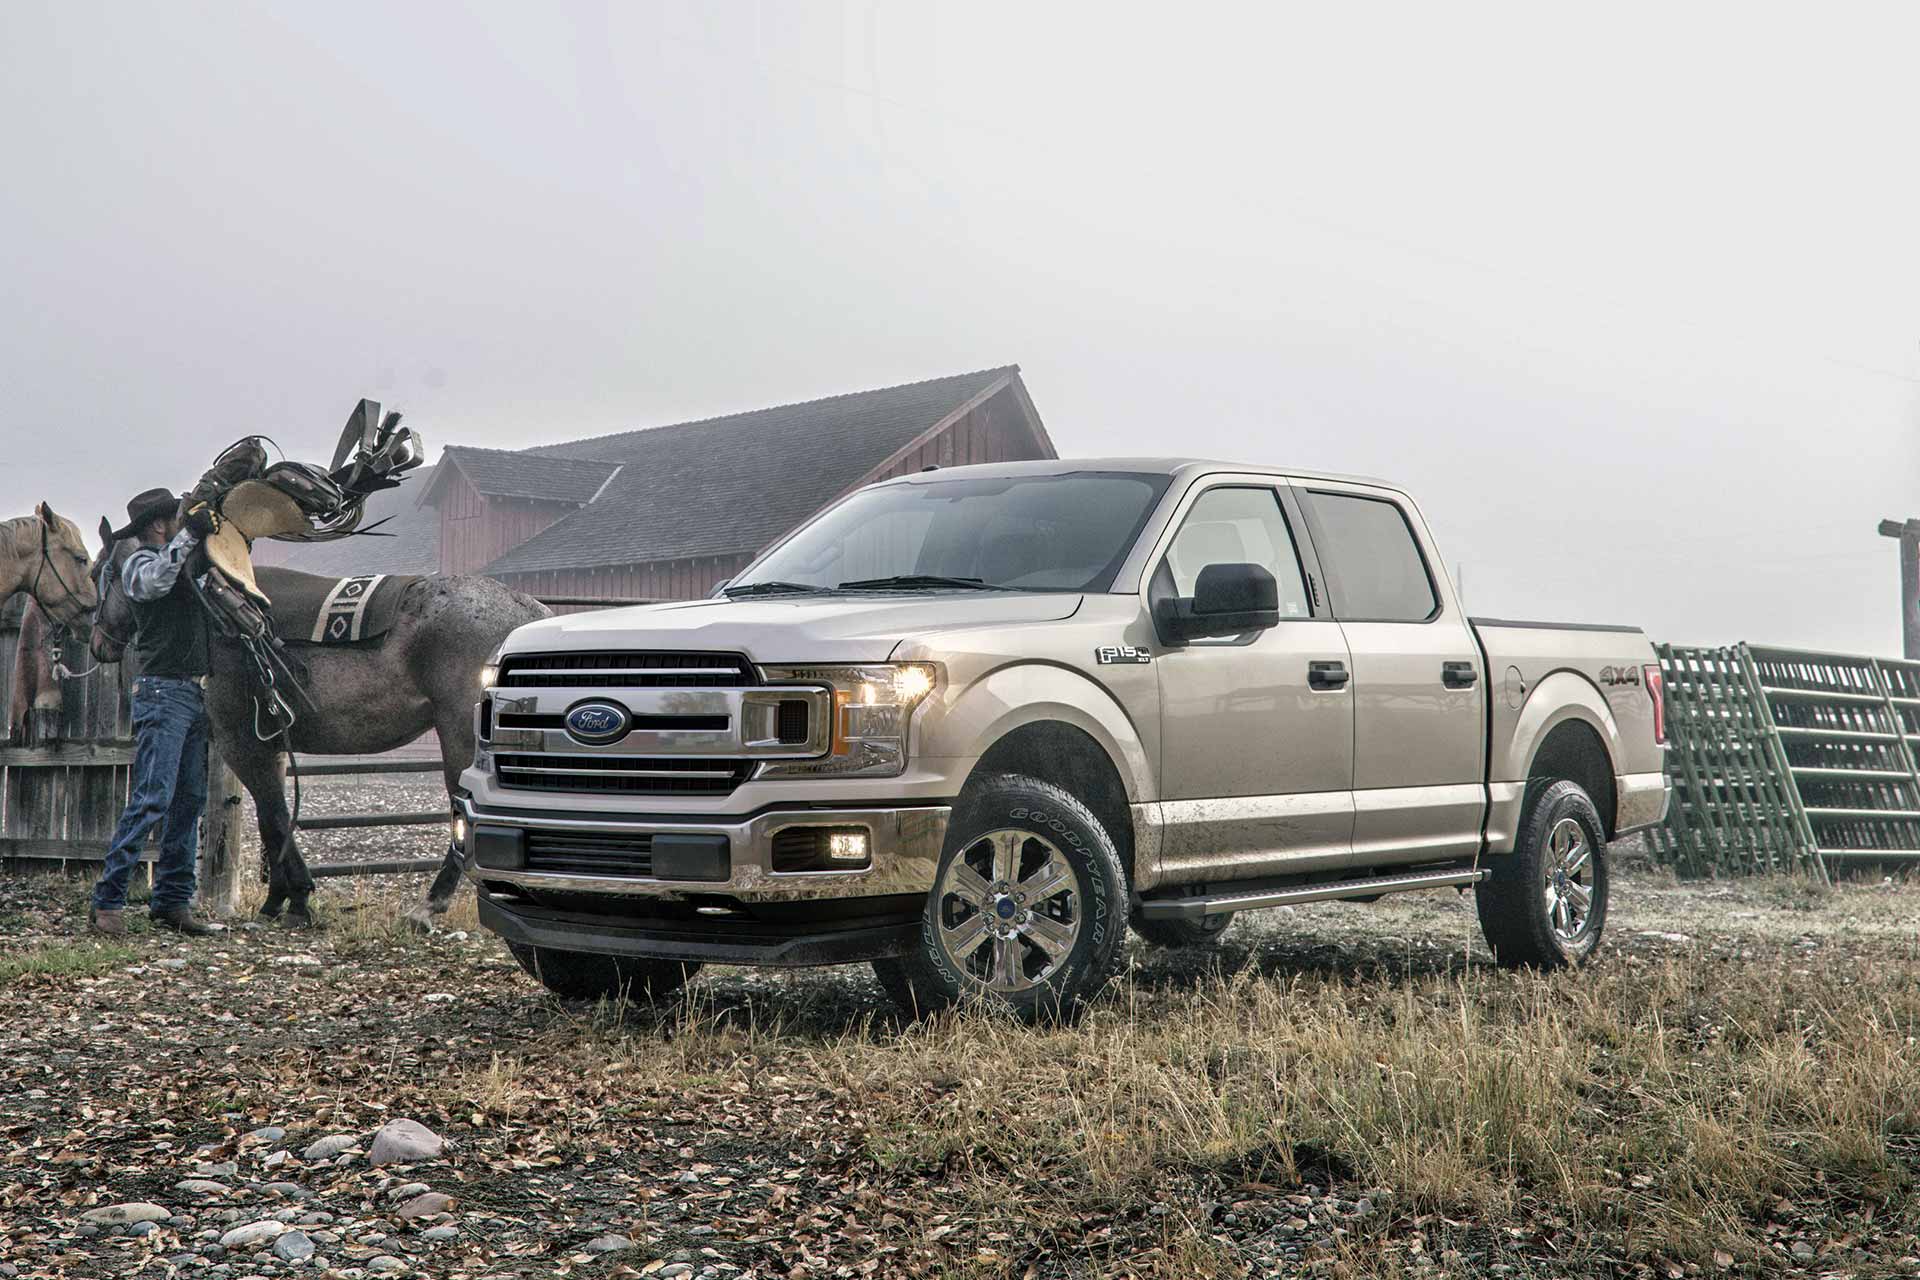 Ford F-150 2018 best-selling truck